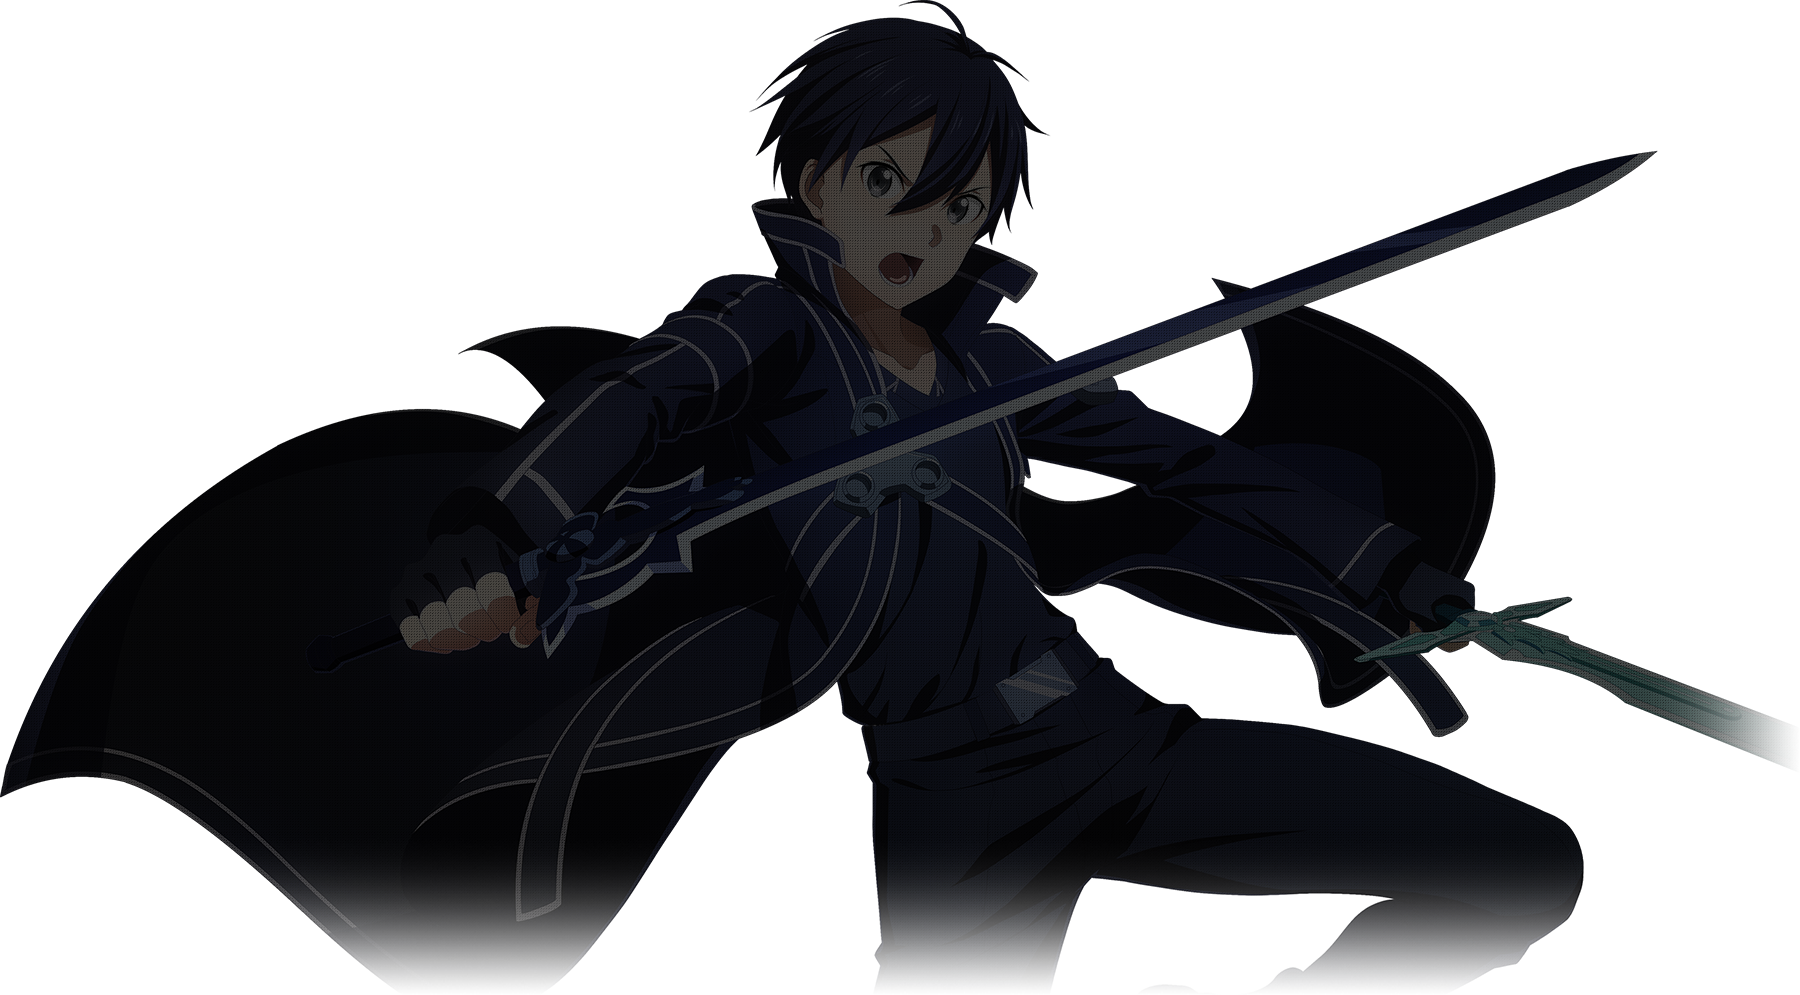 You can sign up for the newest Sword Art Online game right now!